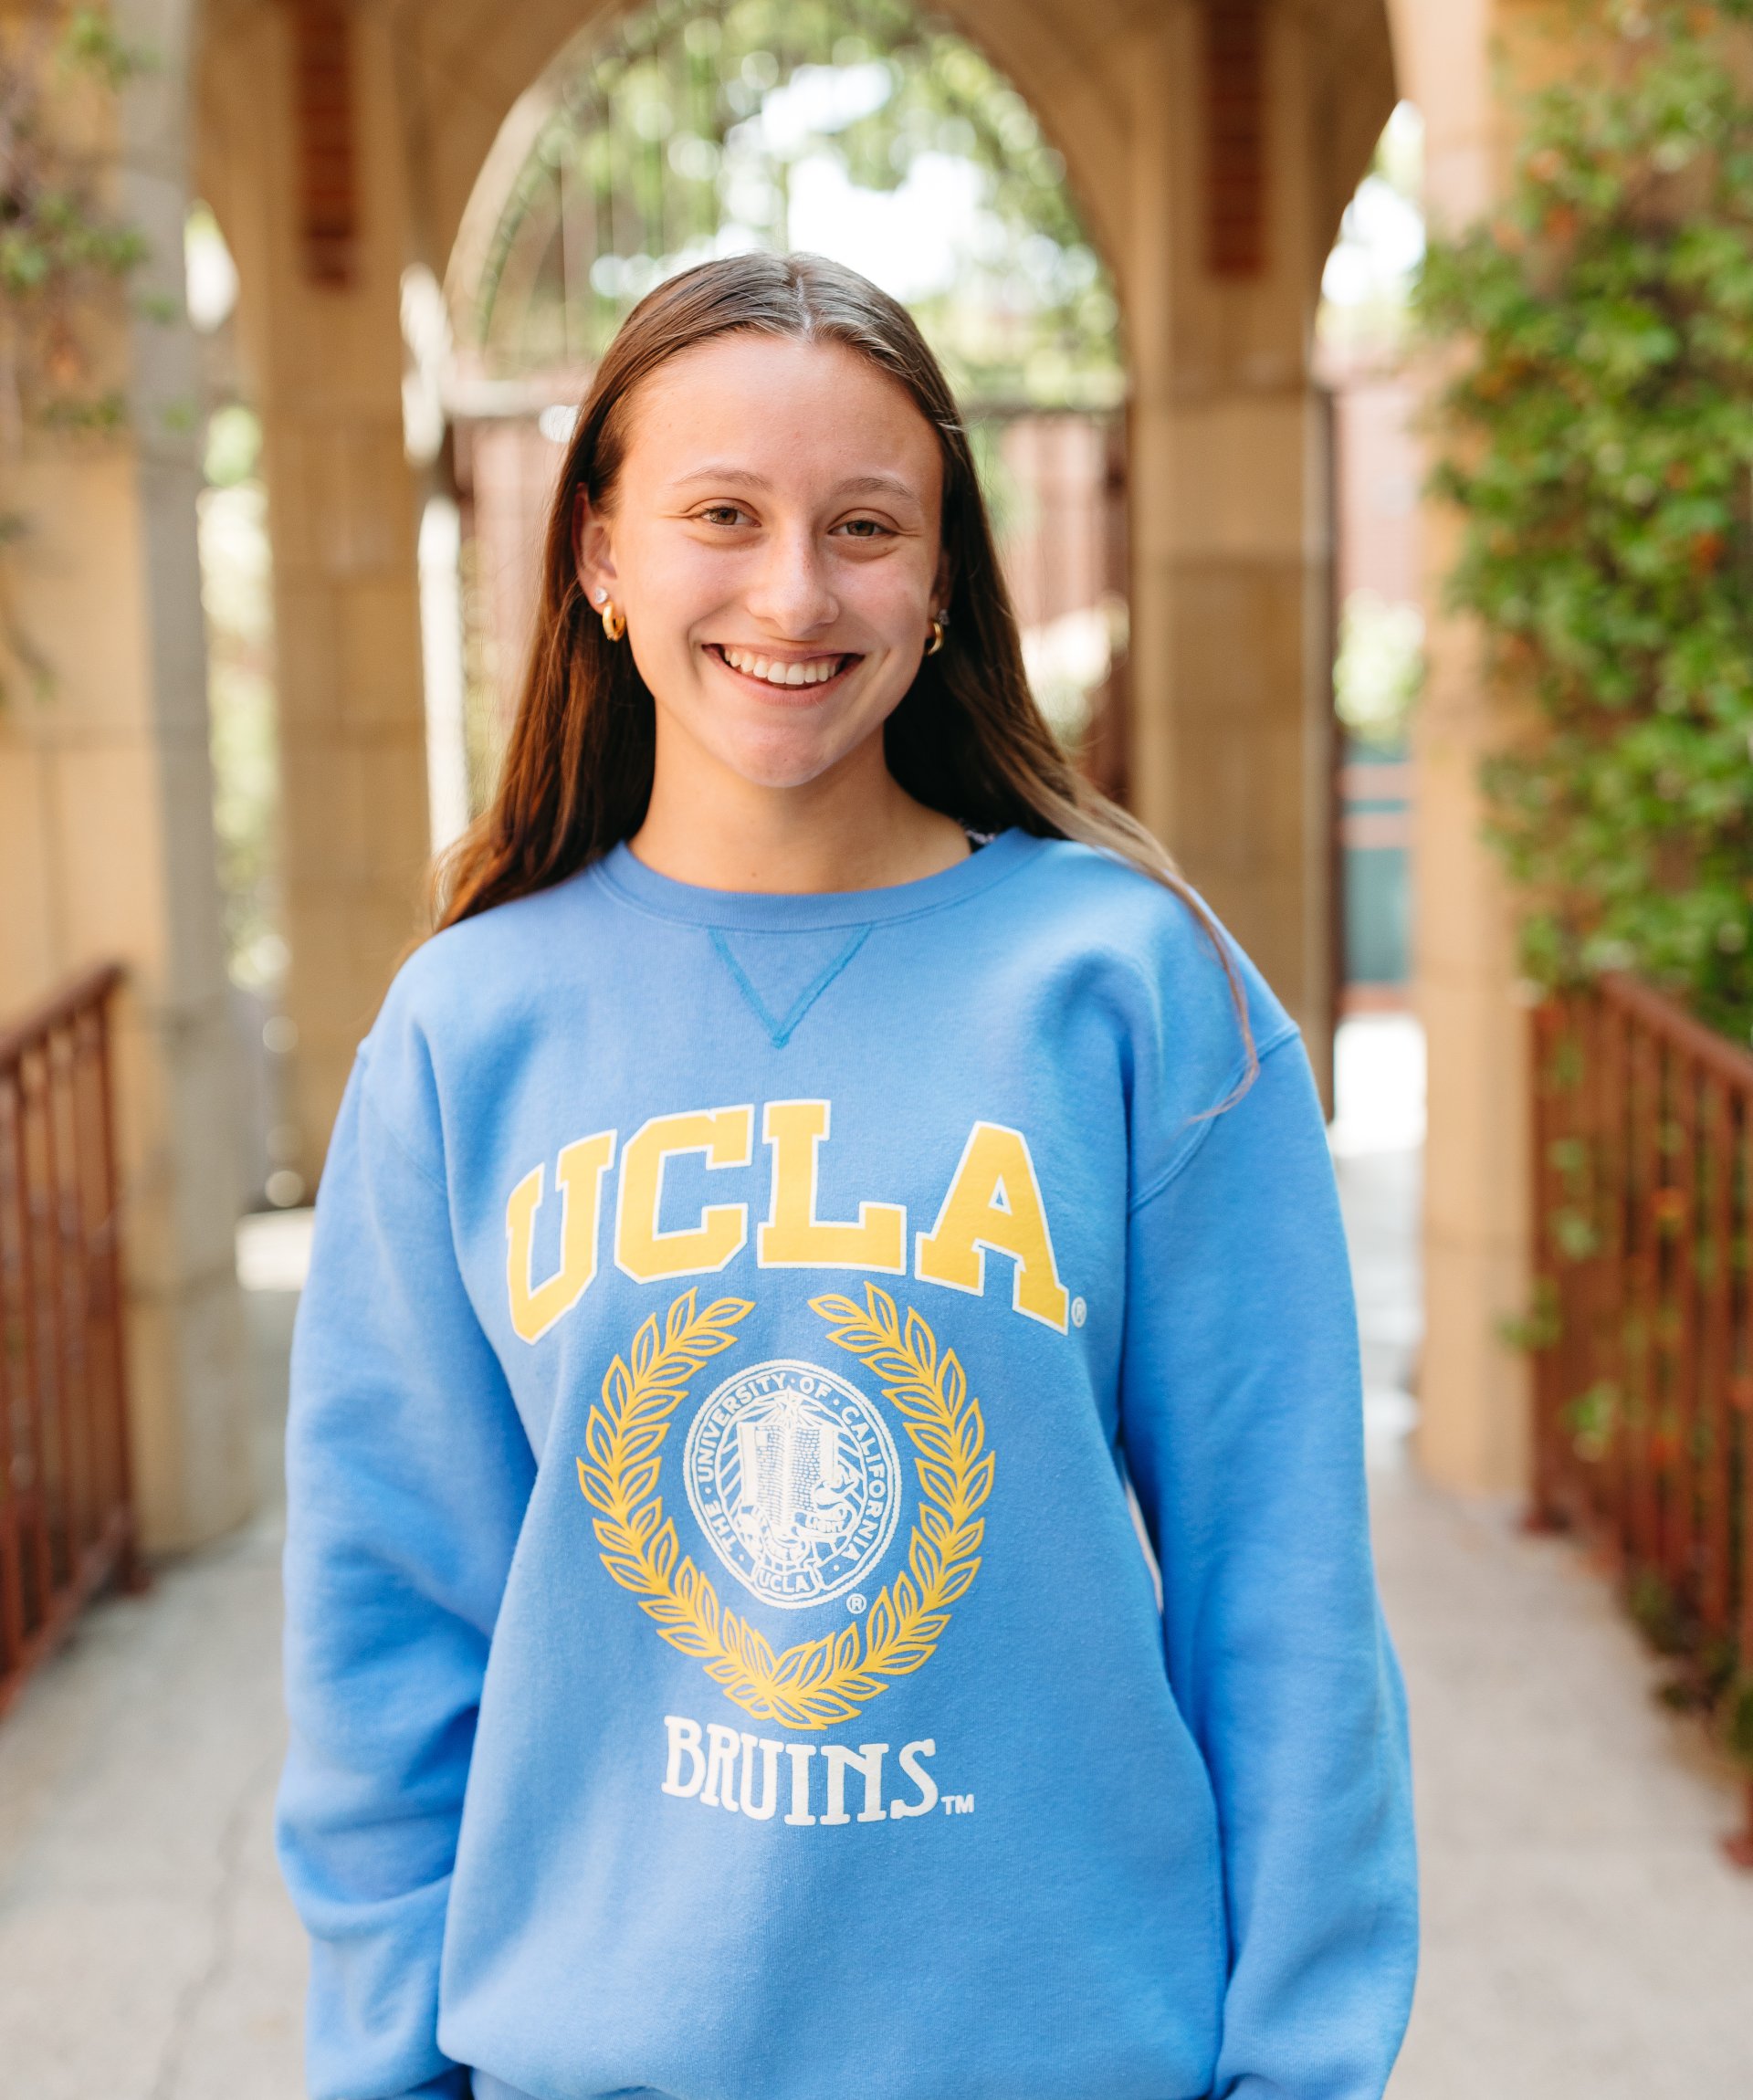 Grace Vander Veen '22, Explores Variety of Passions at UCLA